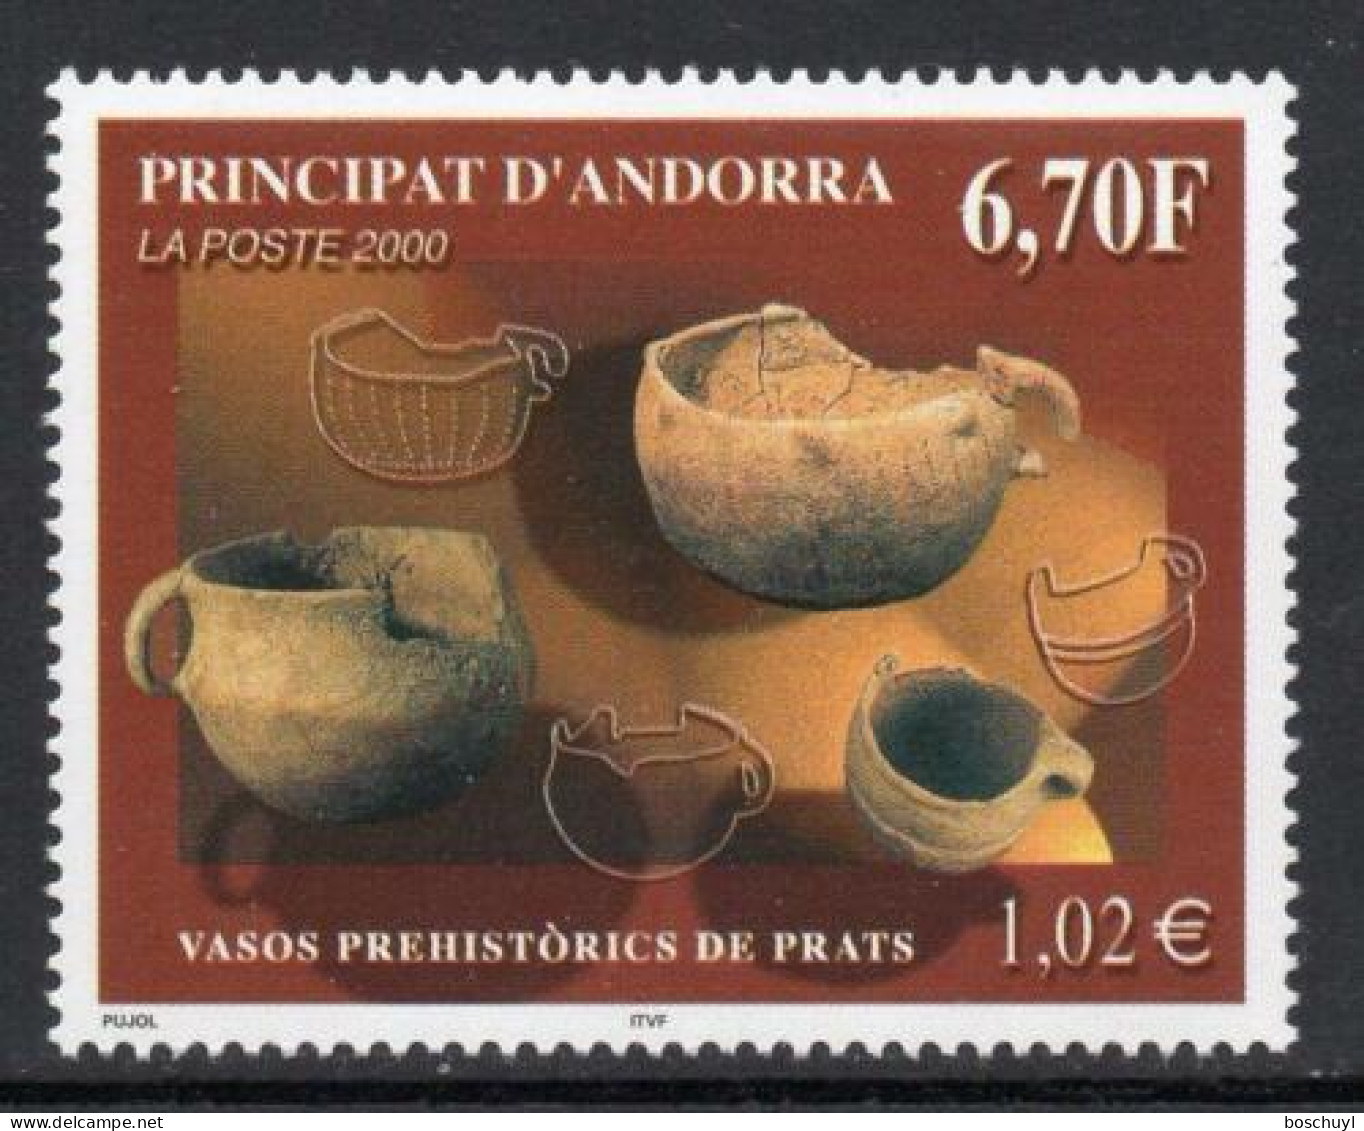 Andorra, French, 2000, Prehistoric Pottery, Ceramics, Archaeology, MNH, Michel 559 - Unused Stamps